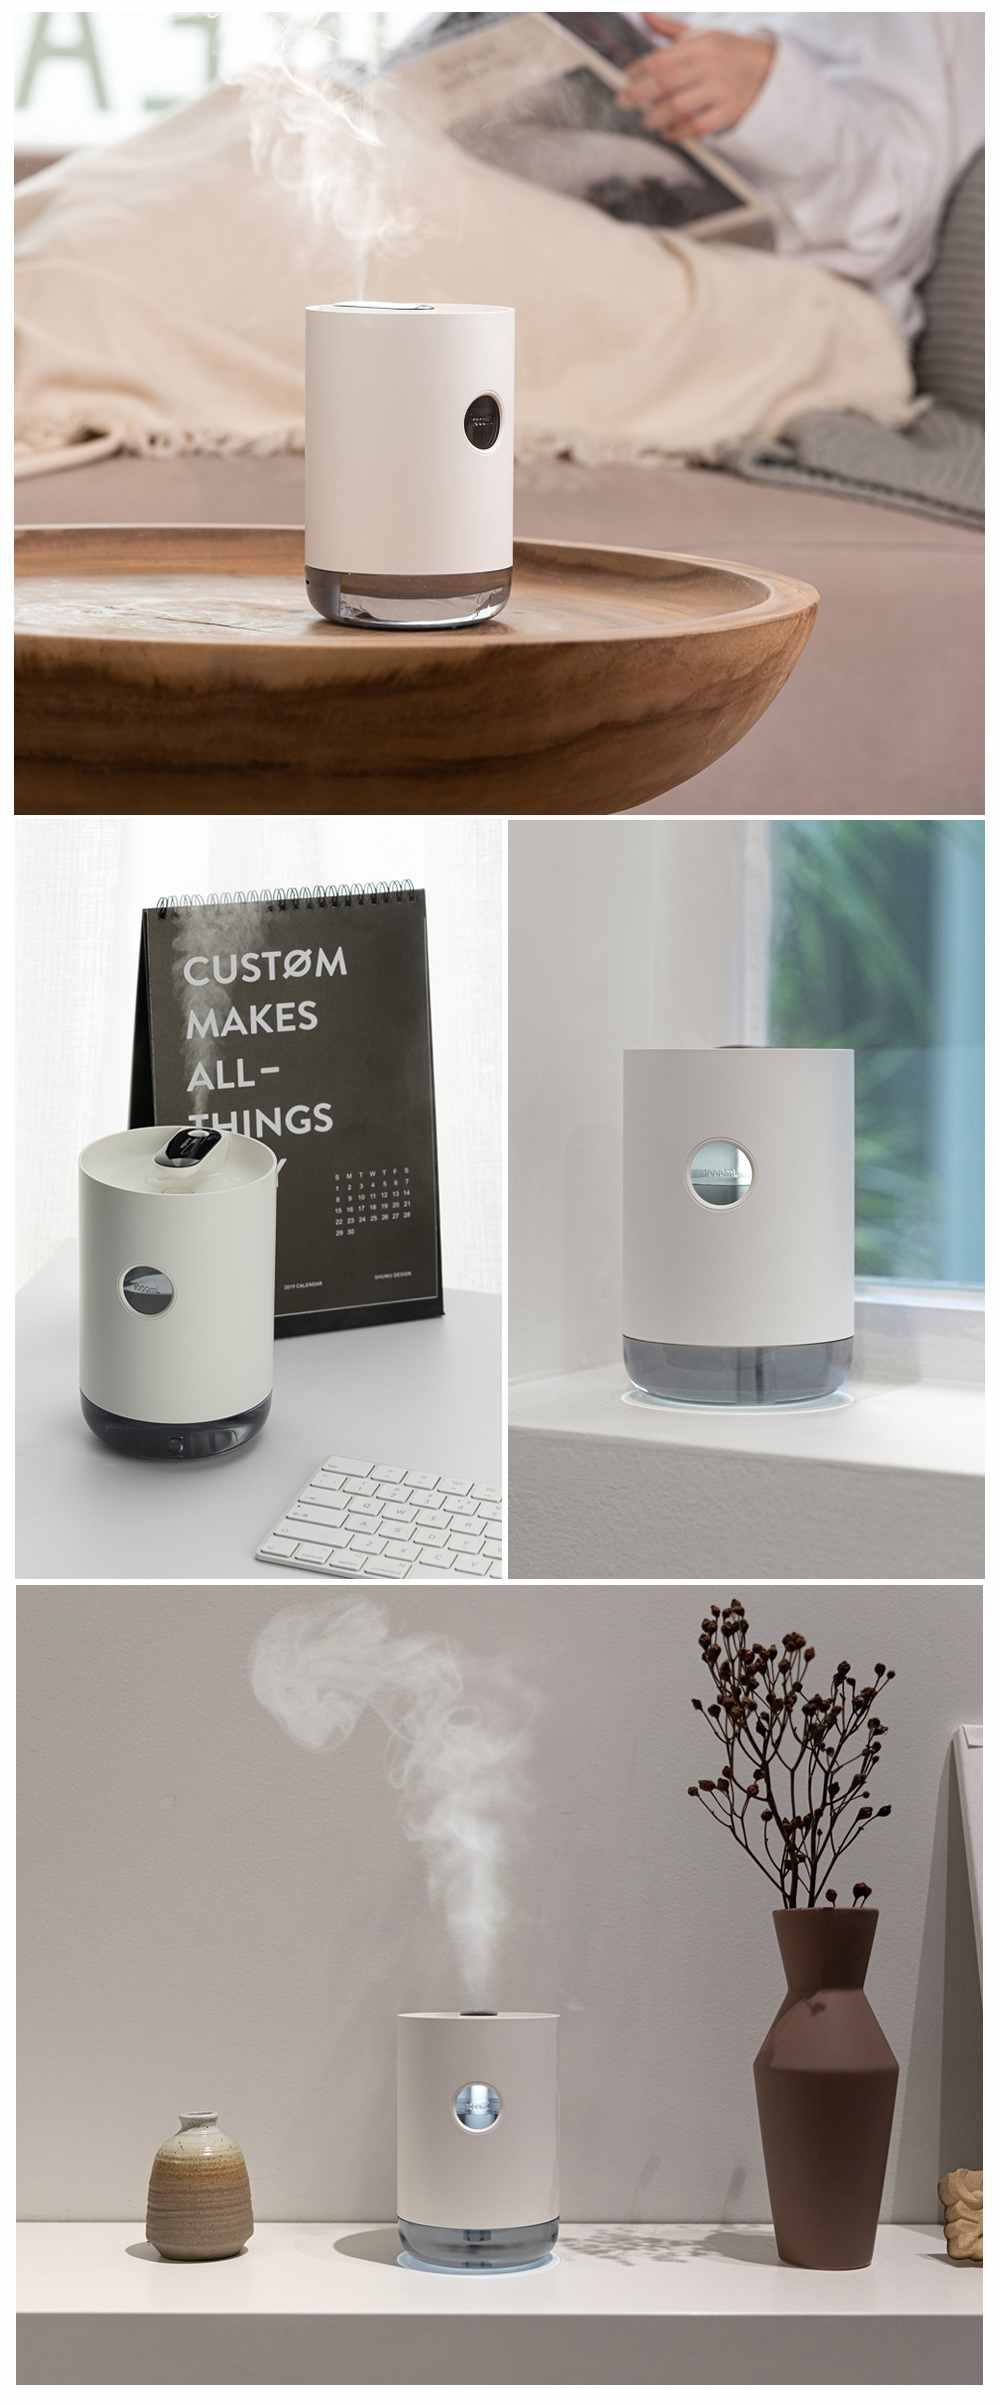 3Life-211-USB-Charging-Humidifier-Two-Mode-Adjusture-Night-Light-LED-Power-Display-Air-Humidifier-1762427-12